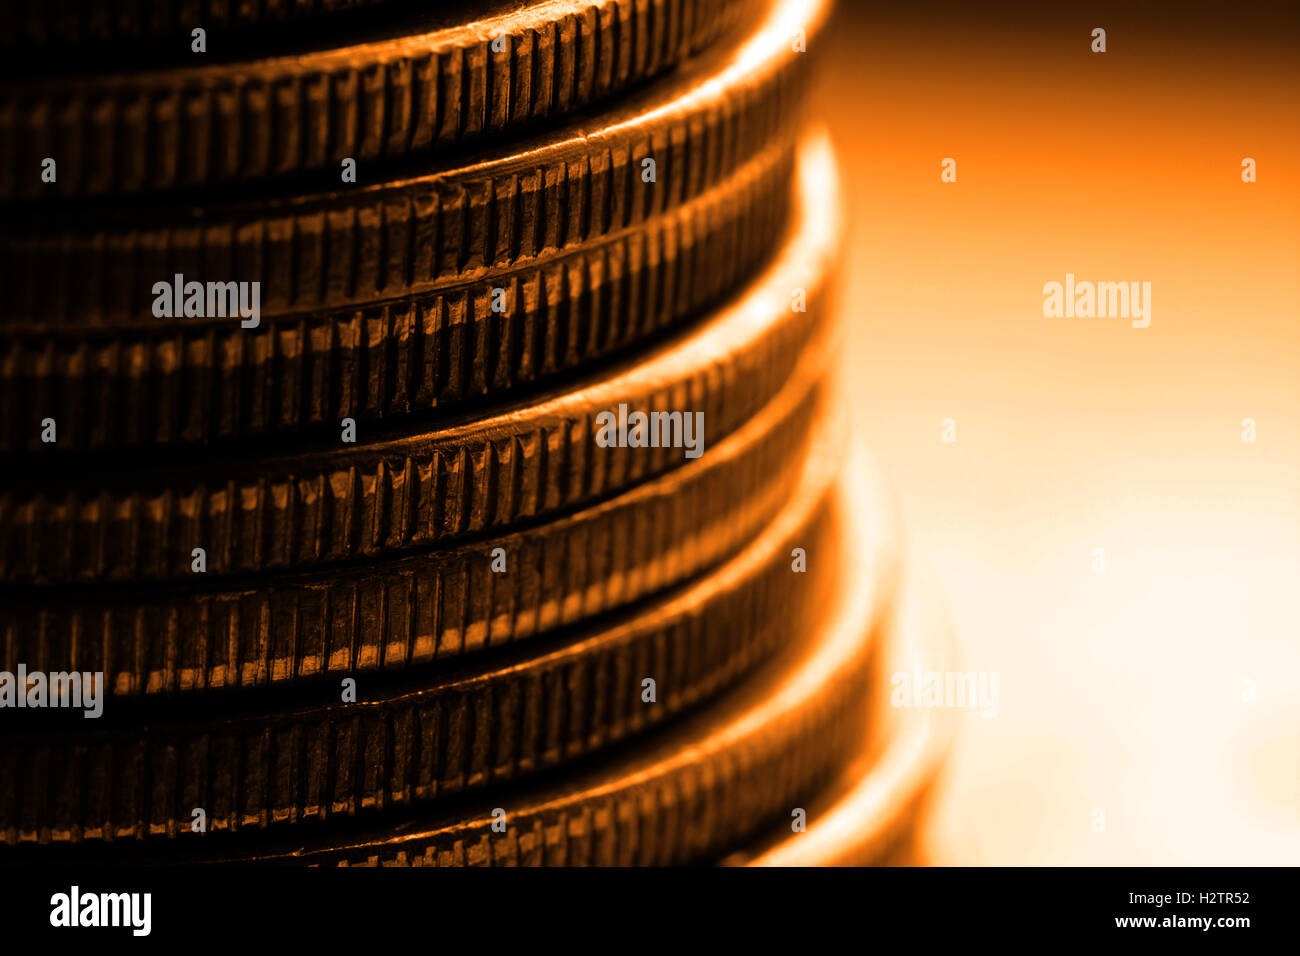 Pile of old coins and bullion with dark background Stock Photo